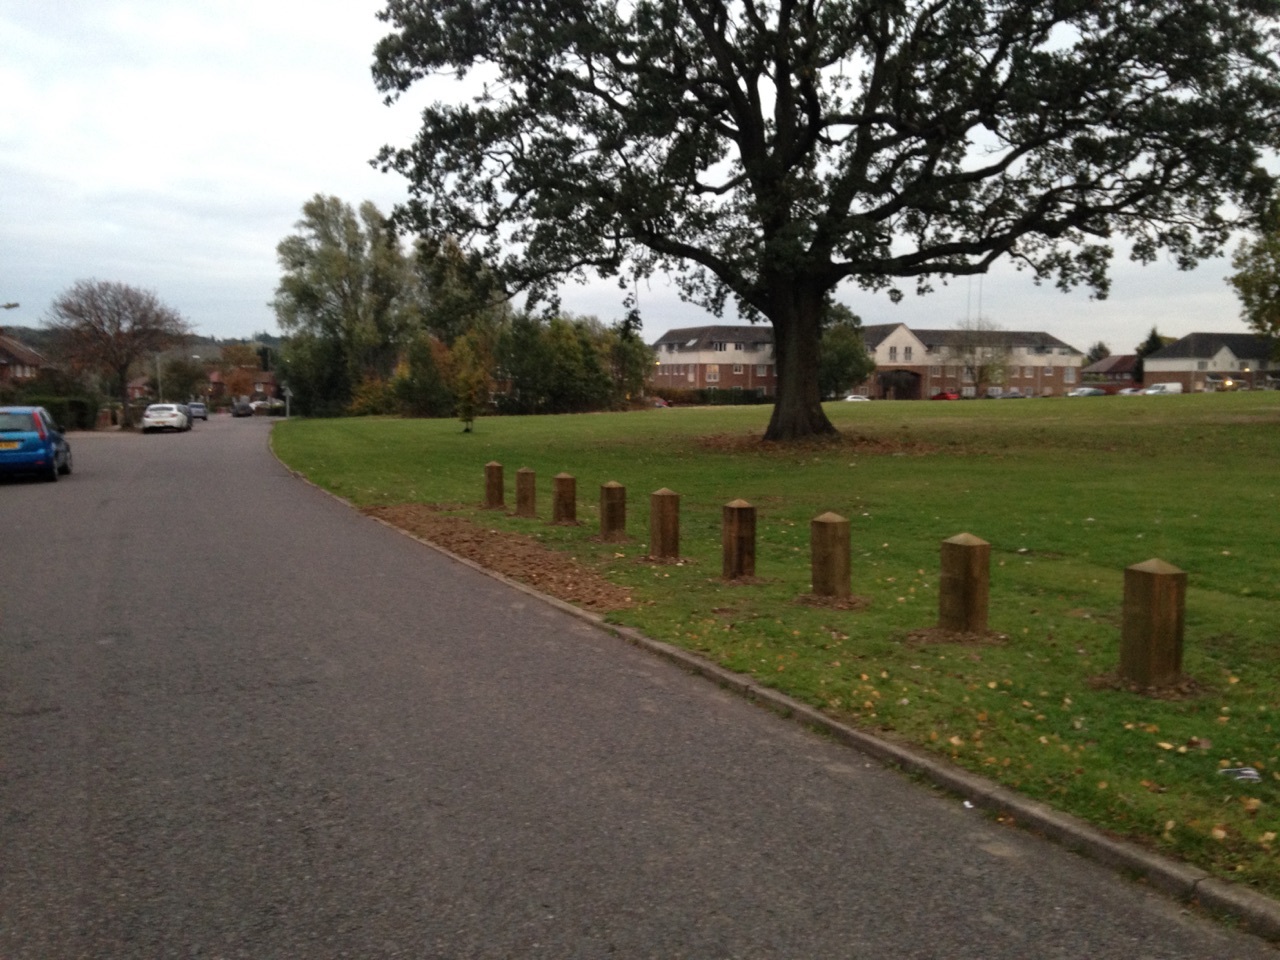 These bollards were installed in Ripon Park in Borehamwood in 2019 and Cllr Bright has suggested hed be willing to take similar action around the rest of Hertsmere